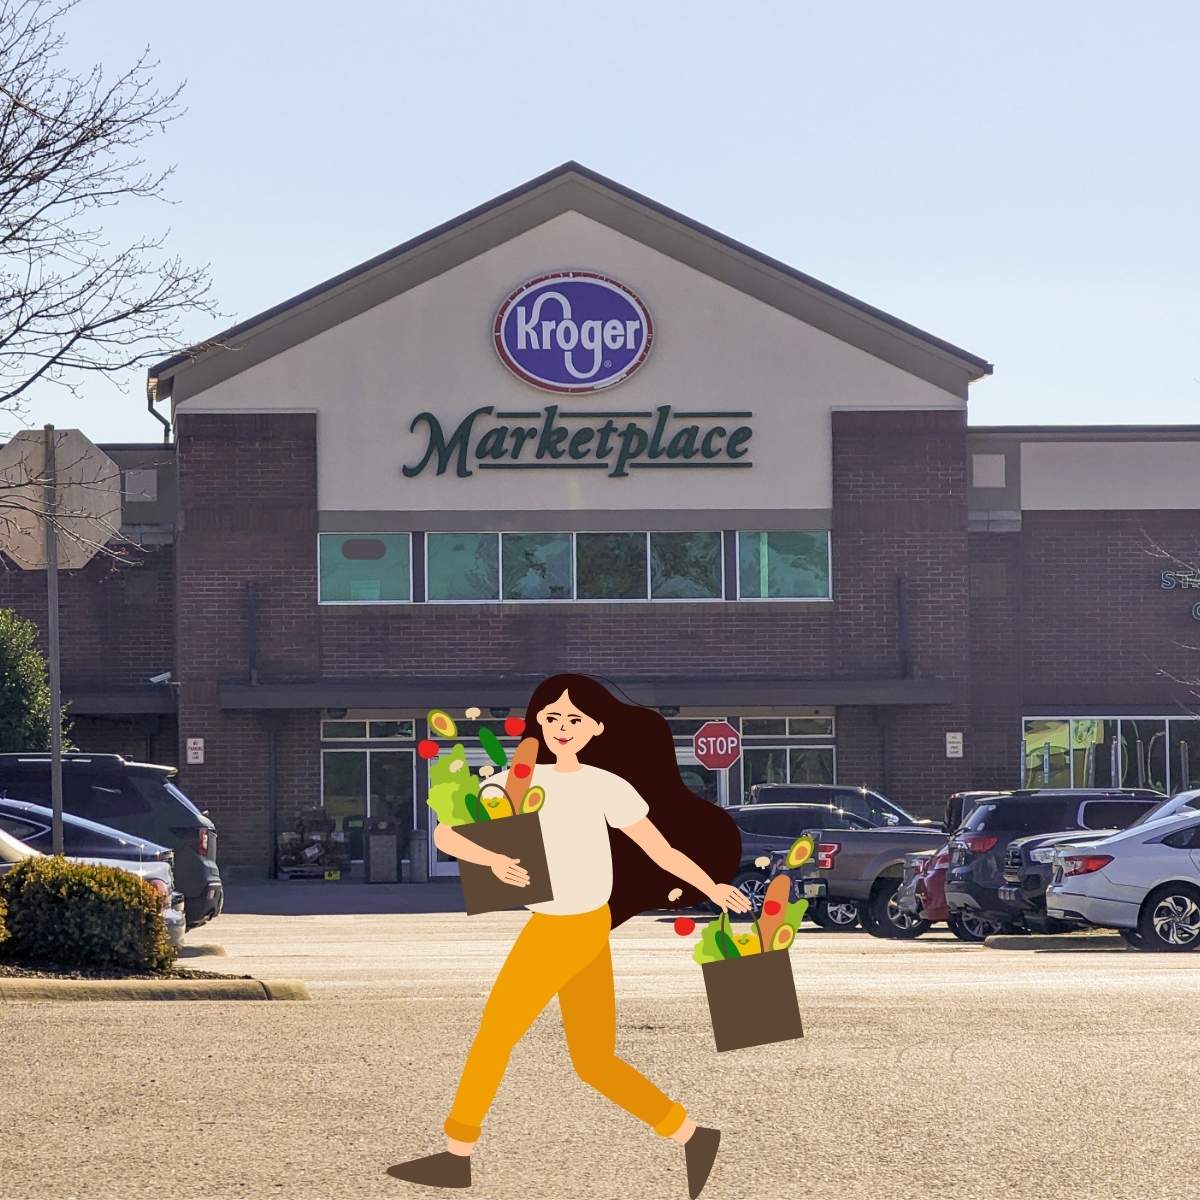 Kroger storefront with a person carrying shopping bags.